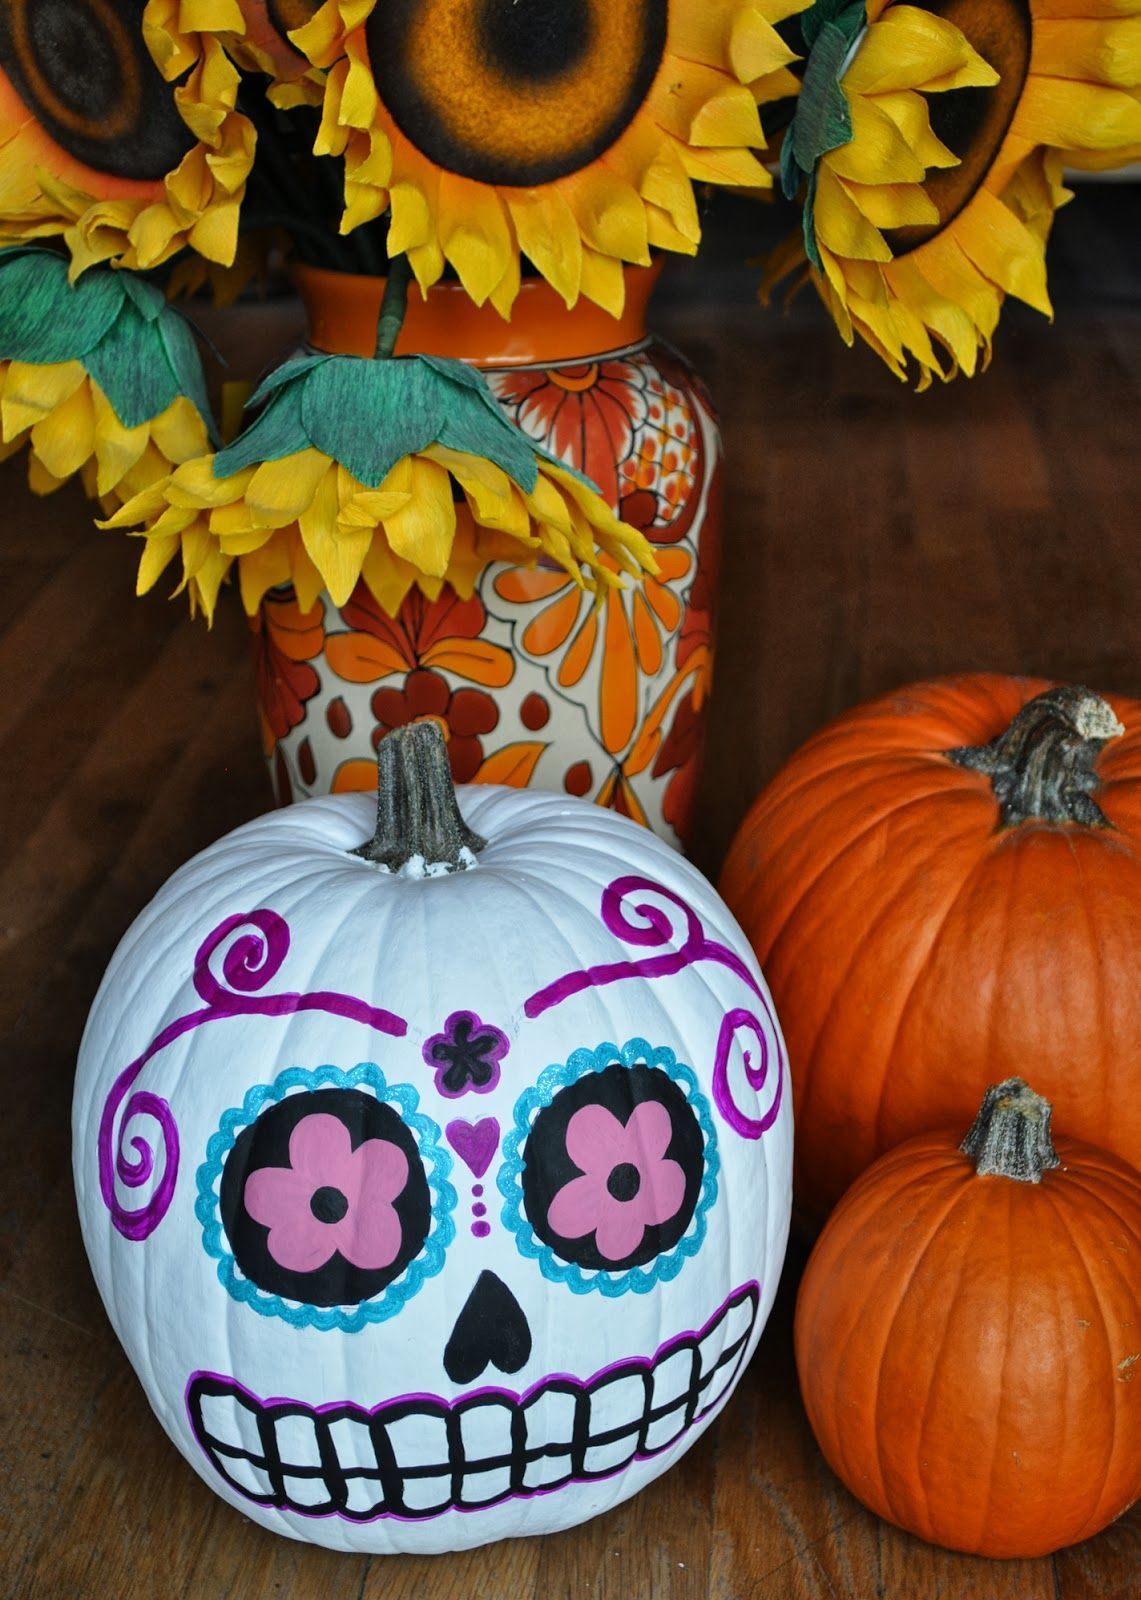 Day of the Dead DIY: Sugar Skull Pumpkins! Where Halloween meets Day of the Dead!